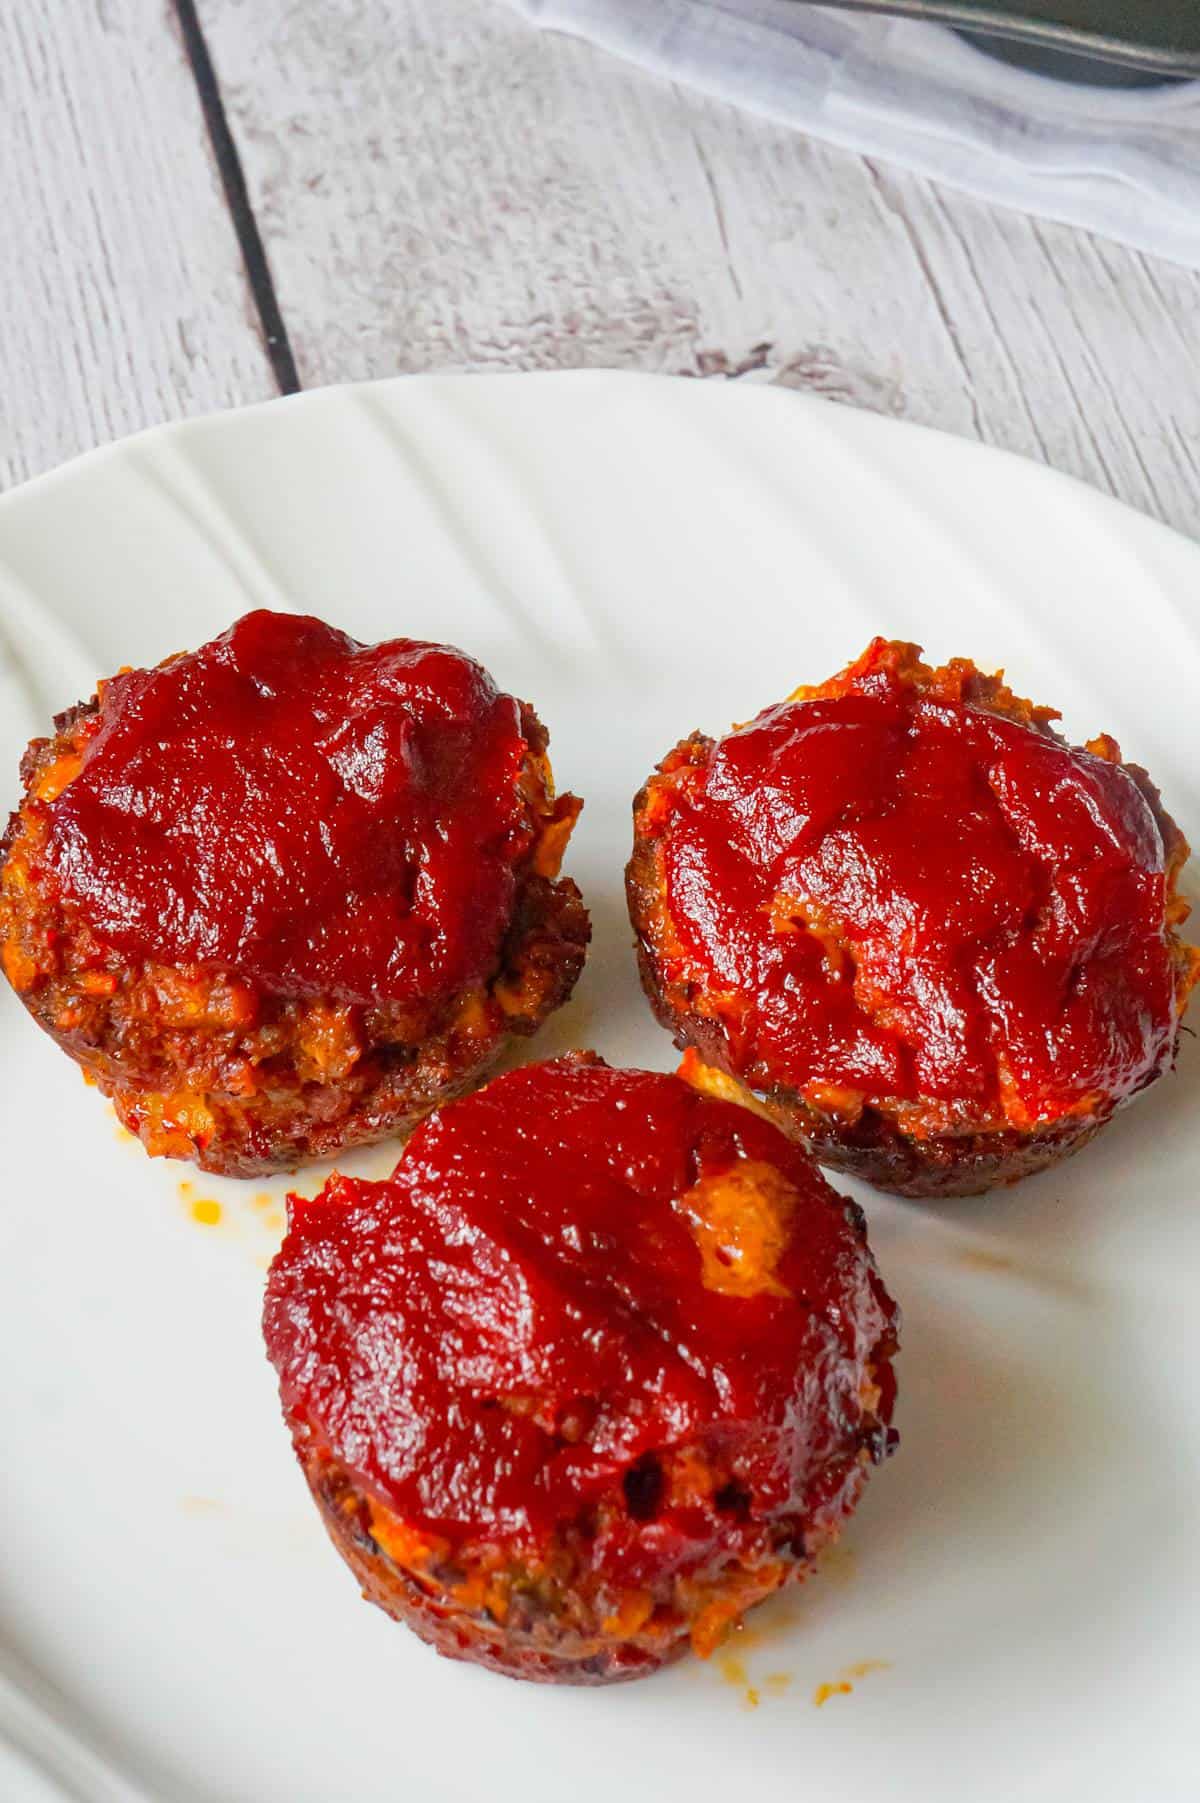 Meatloaf Muffins are a simple and delicious mini meatloaf recipe made with ground beef, Lipton onion soup mix, Ritz crackers and Heinz chili sauce.